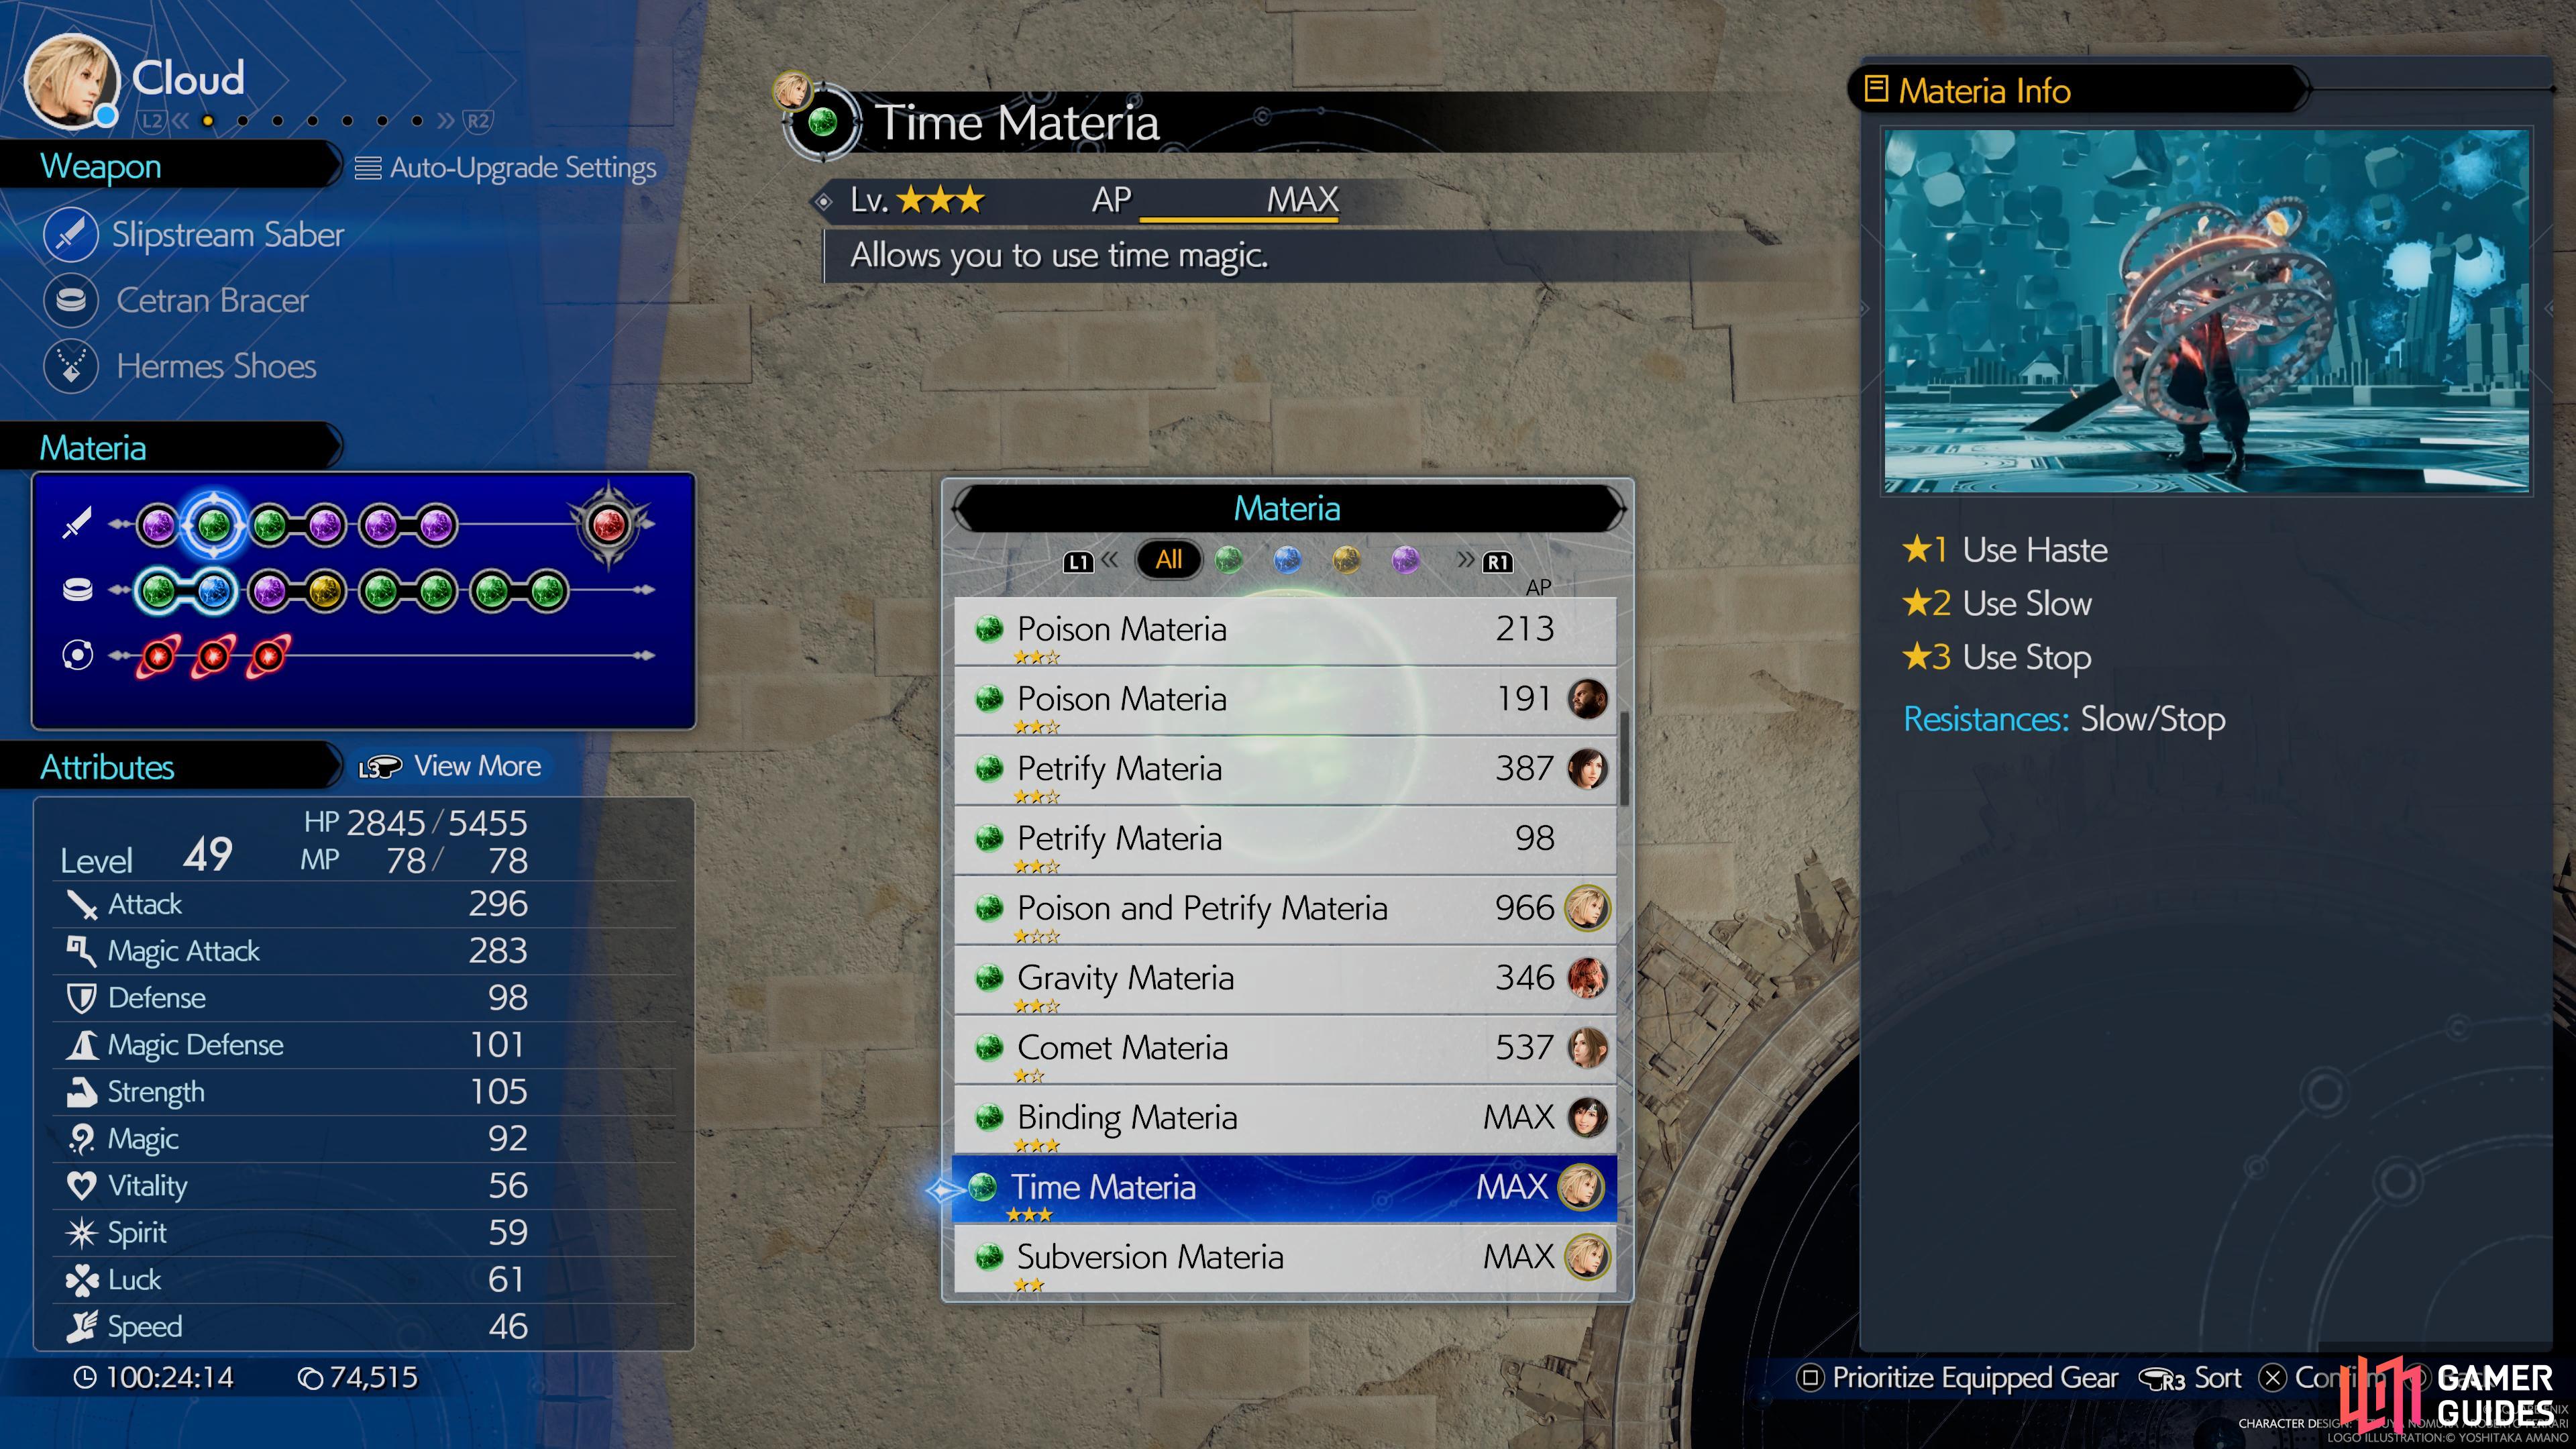 The Time Materia can be purchased from vendors or obtained via minigames